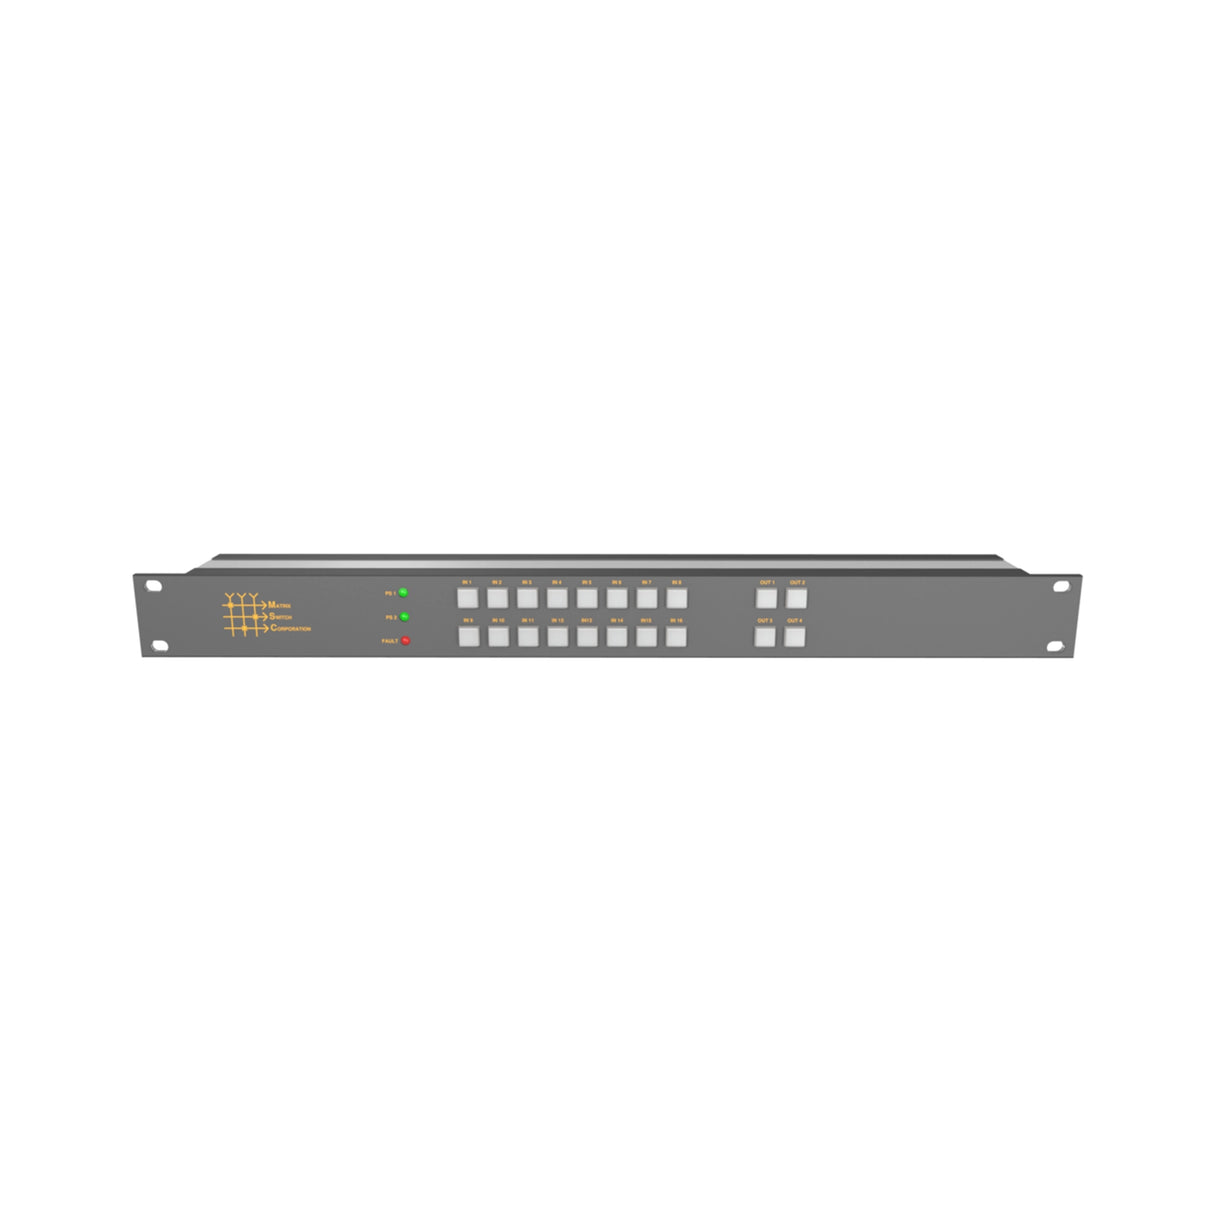 Matrix Switch MSC-XD164L 16 Input/4 Output 3G-SDI Video Router with Button Panel